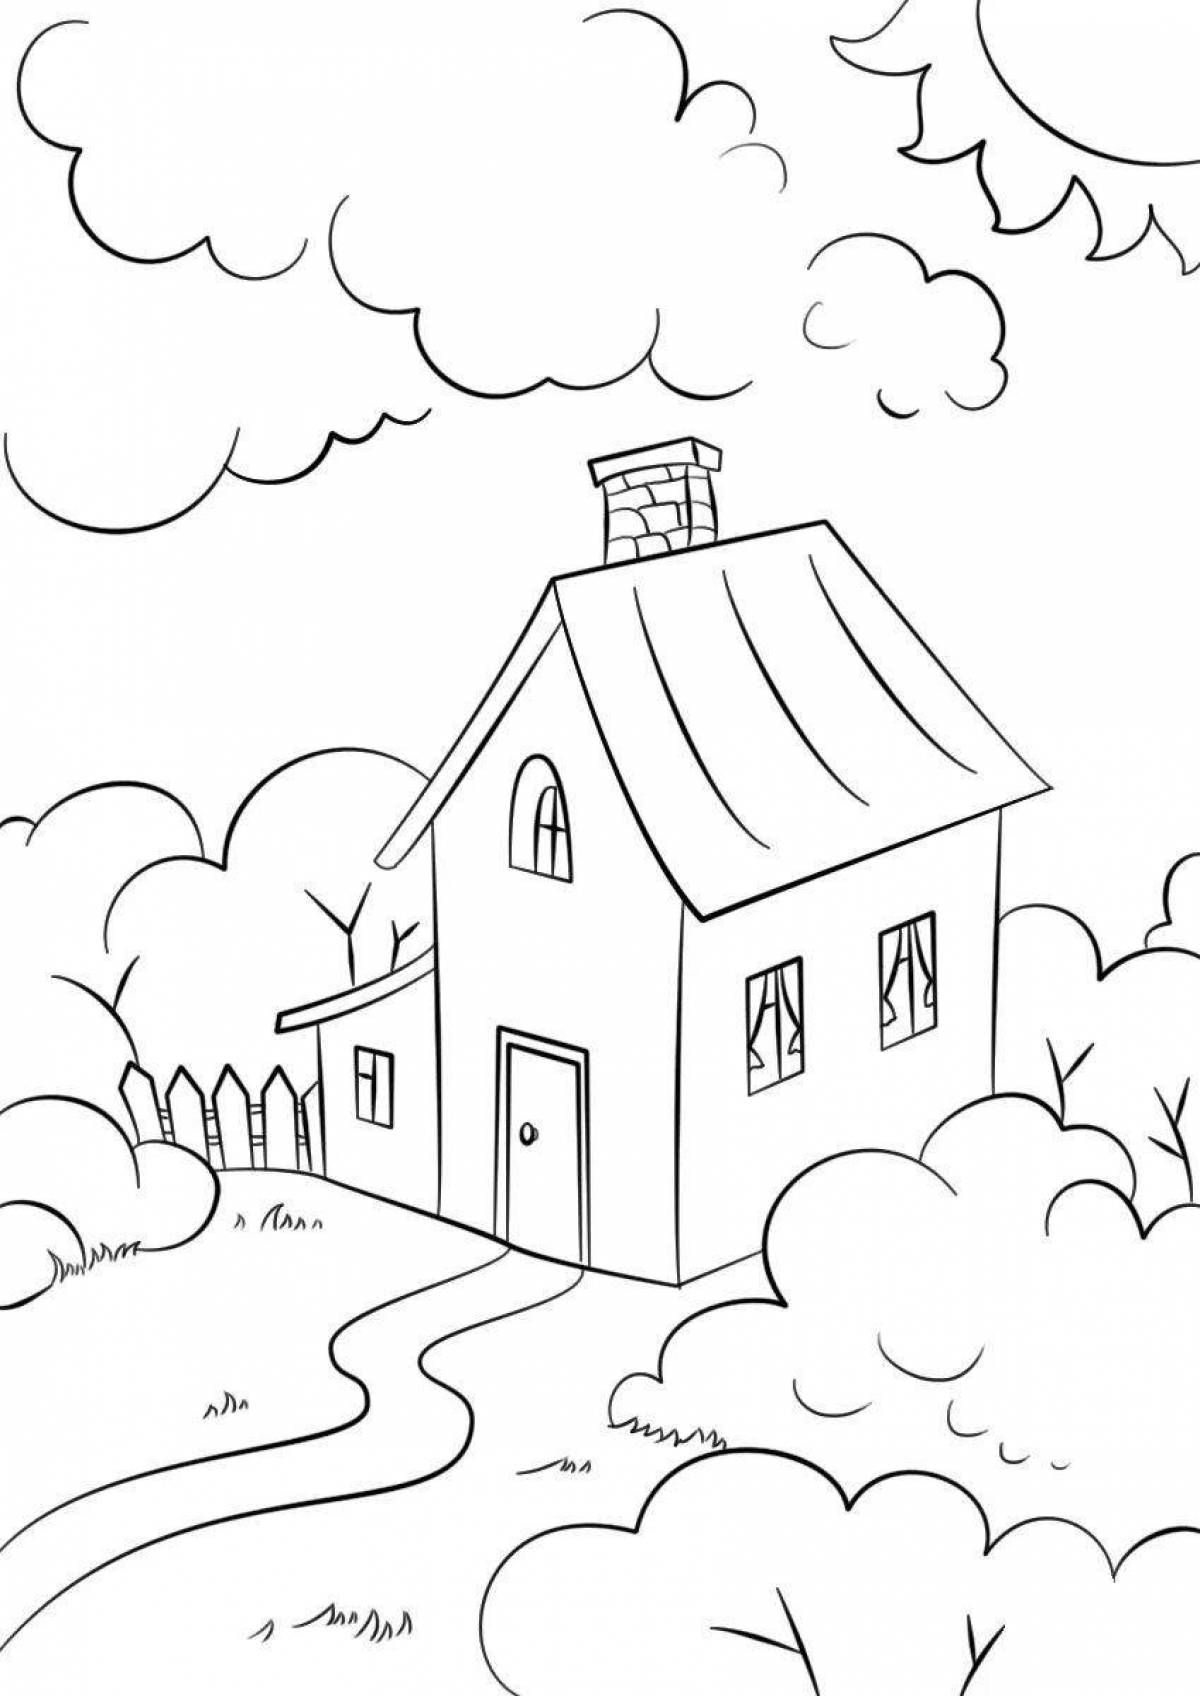 Coloring page for children joyful country house